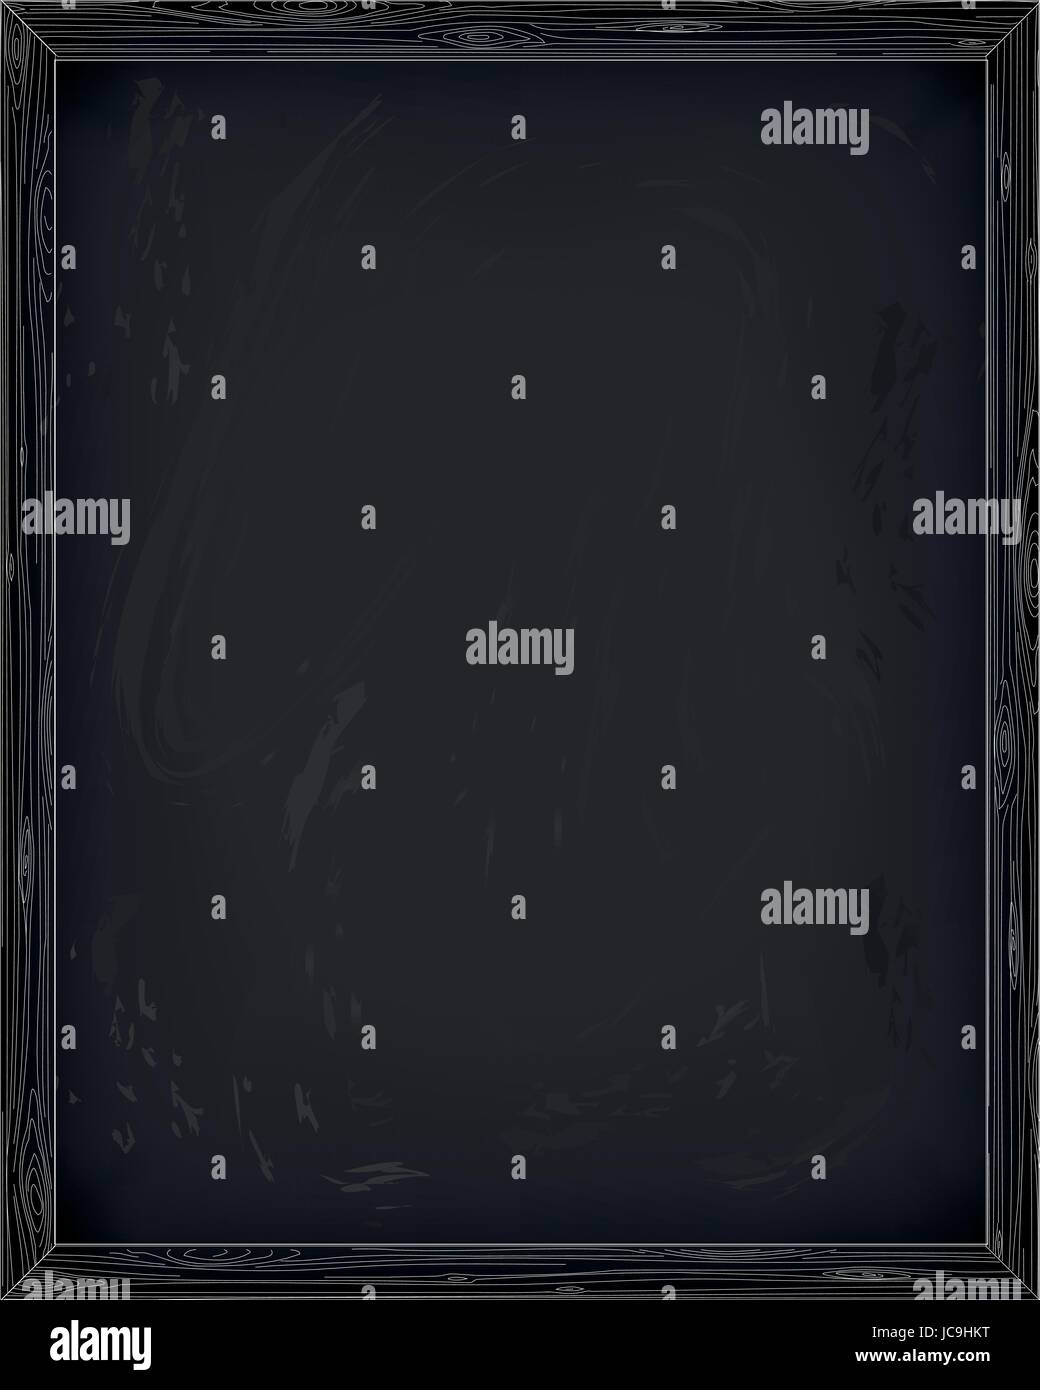 Chalkboard blackboard noticeboard board blank clean canvas plank background texture wooden frame. Vector vertical close-up front view beautiful illust Stock Vector